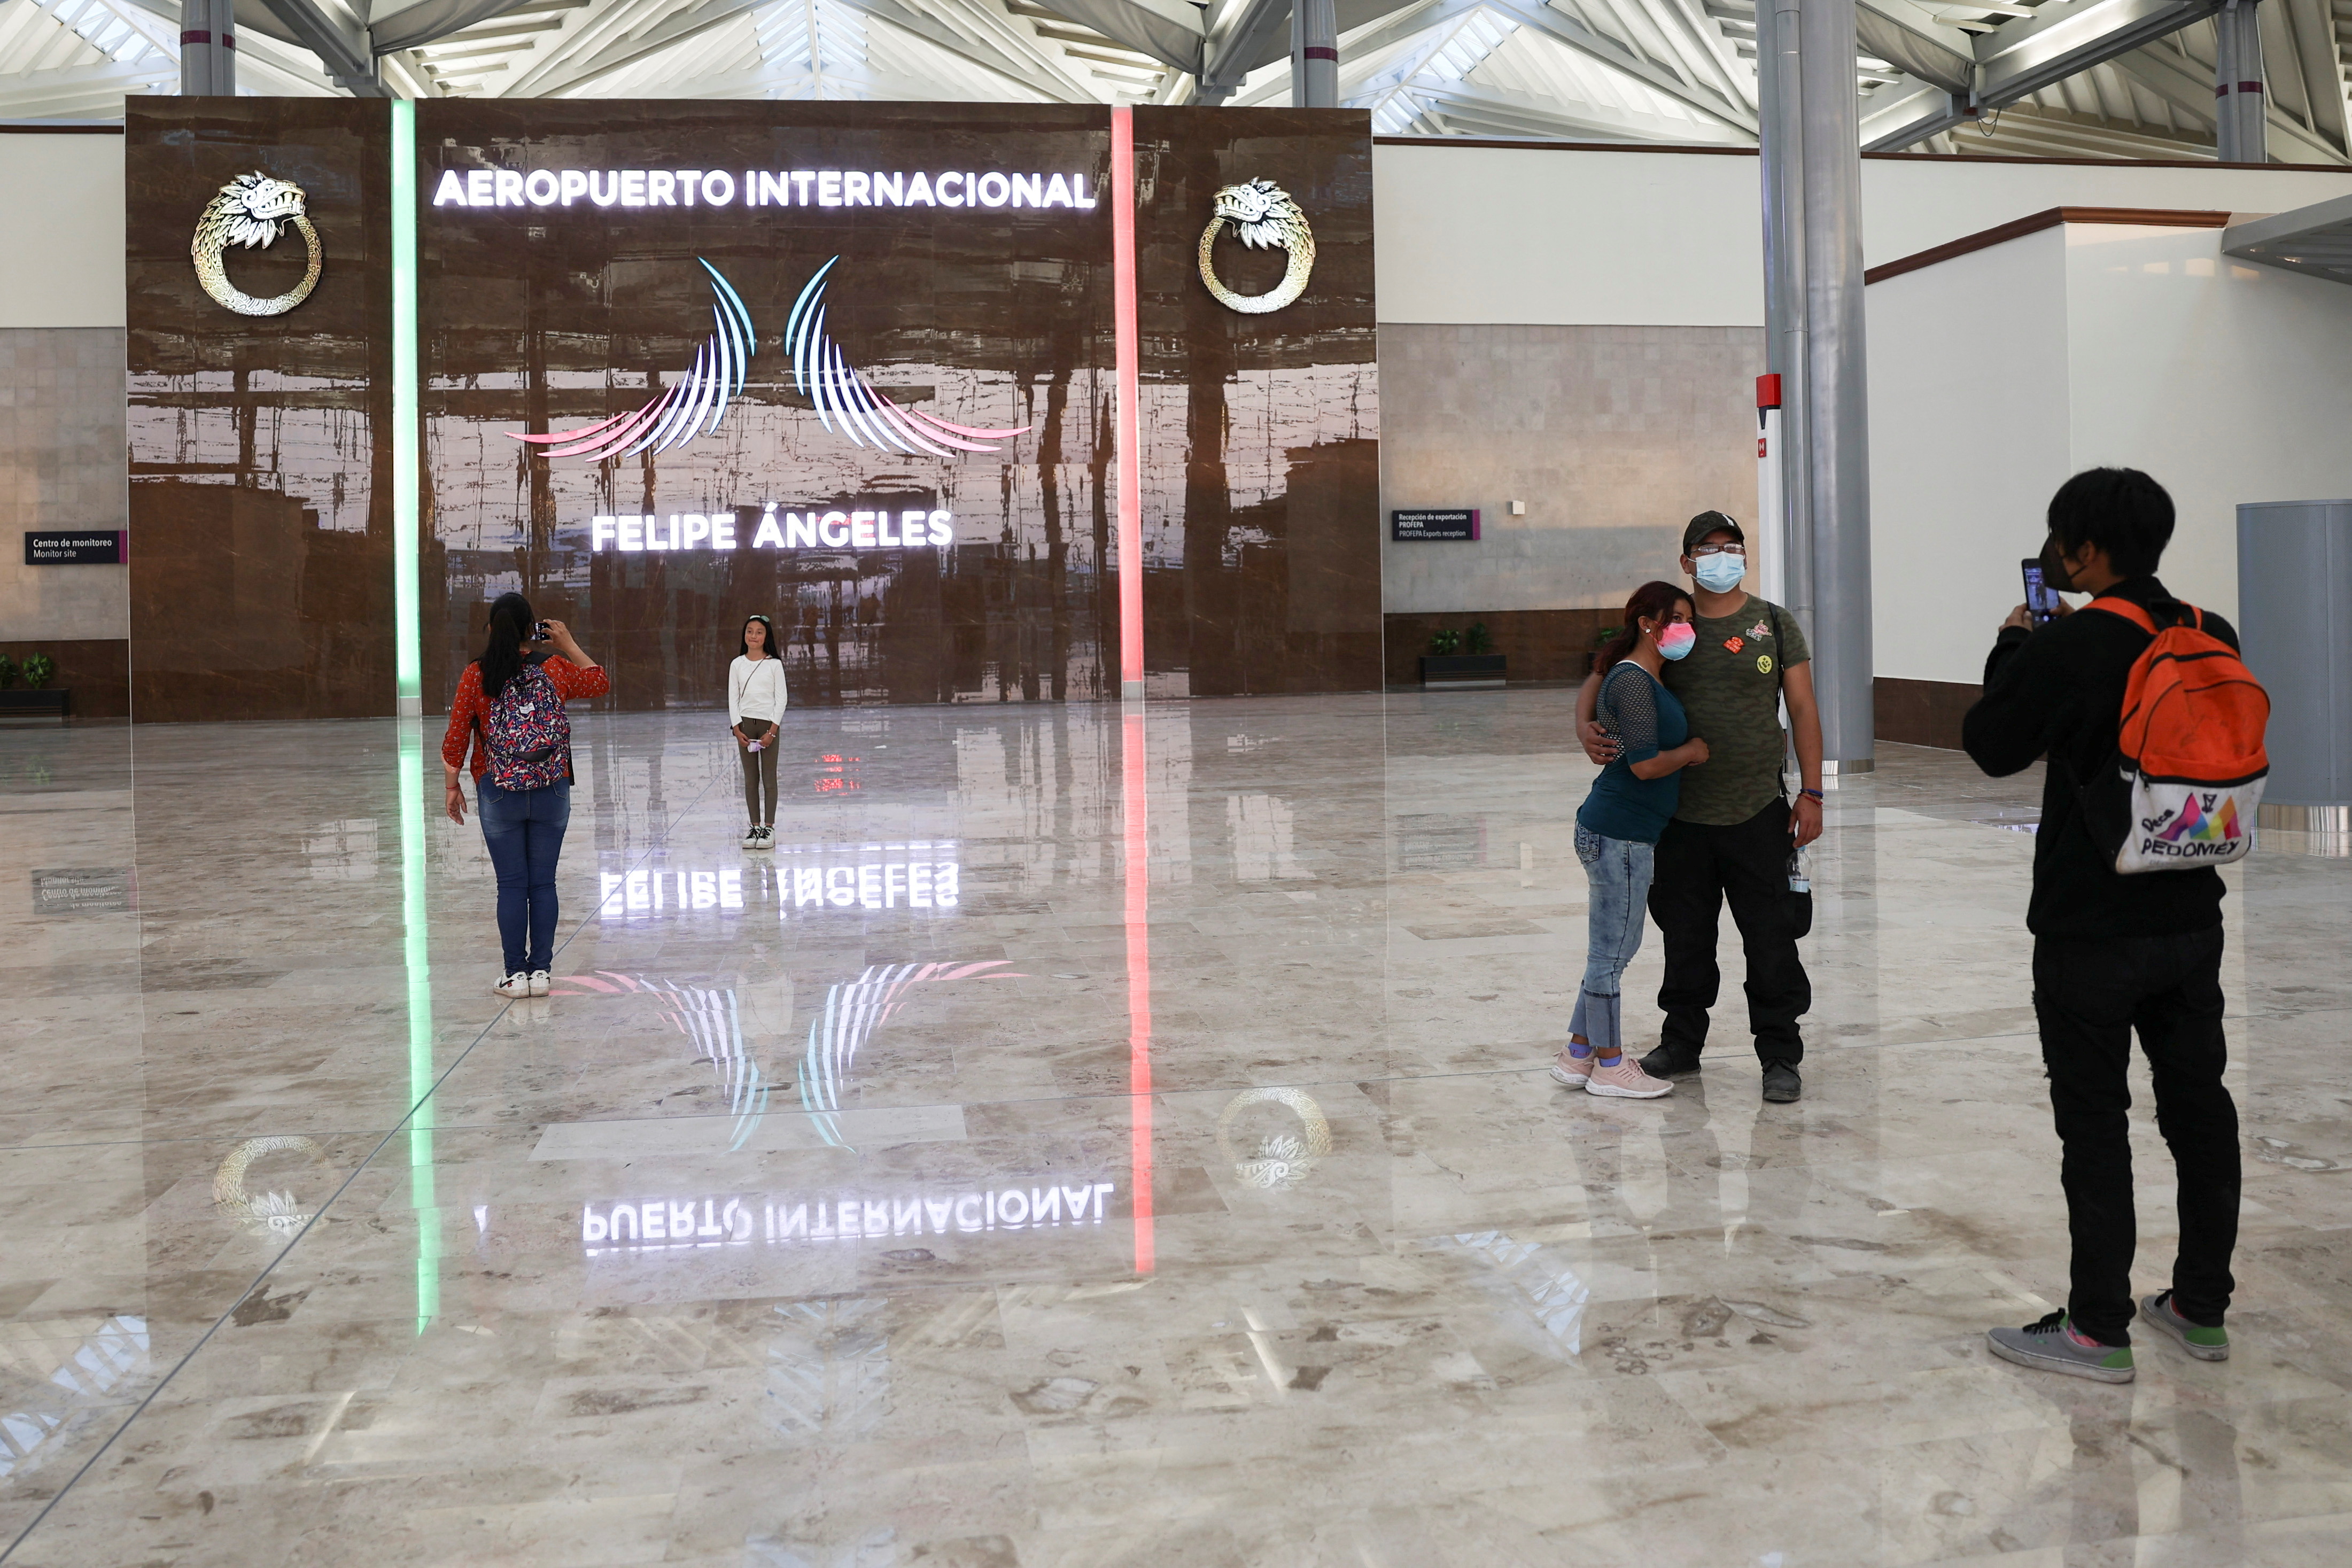 People take photos of themselves at an area of the new Felipe Angeles international airport, in Zumpango